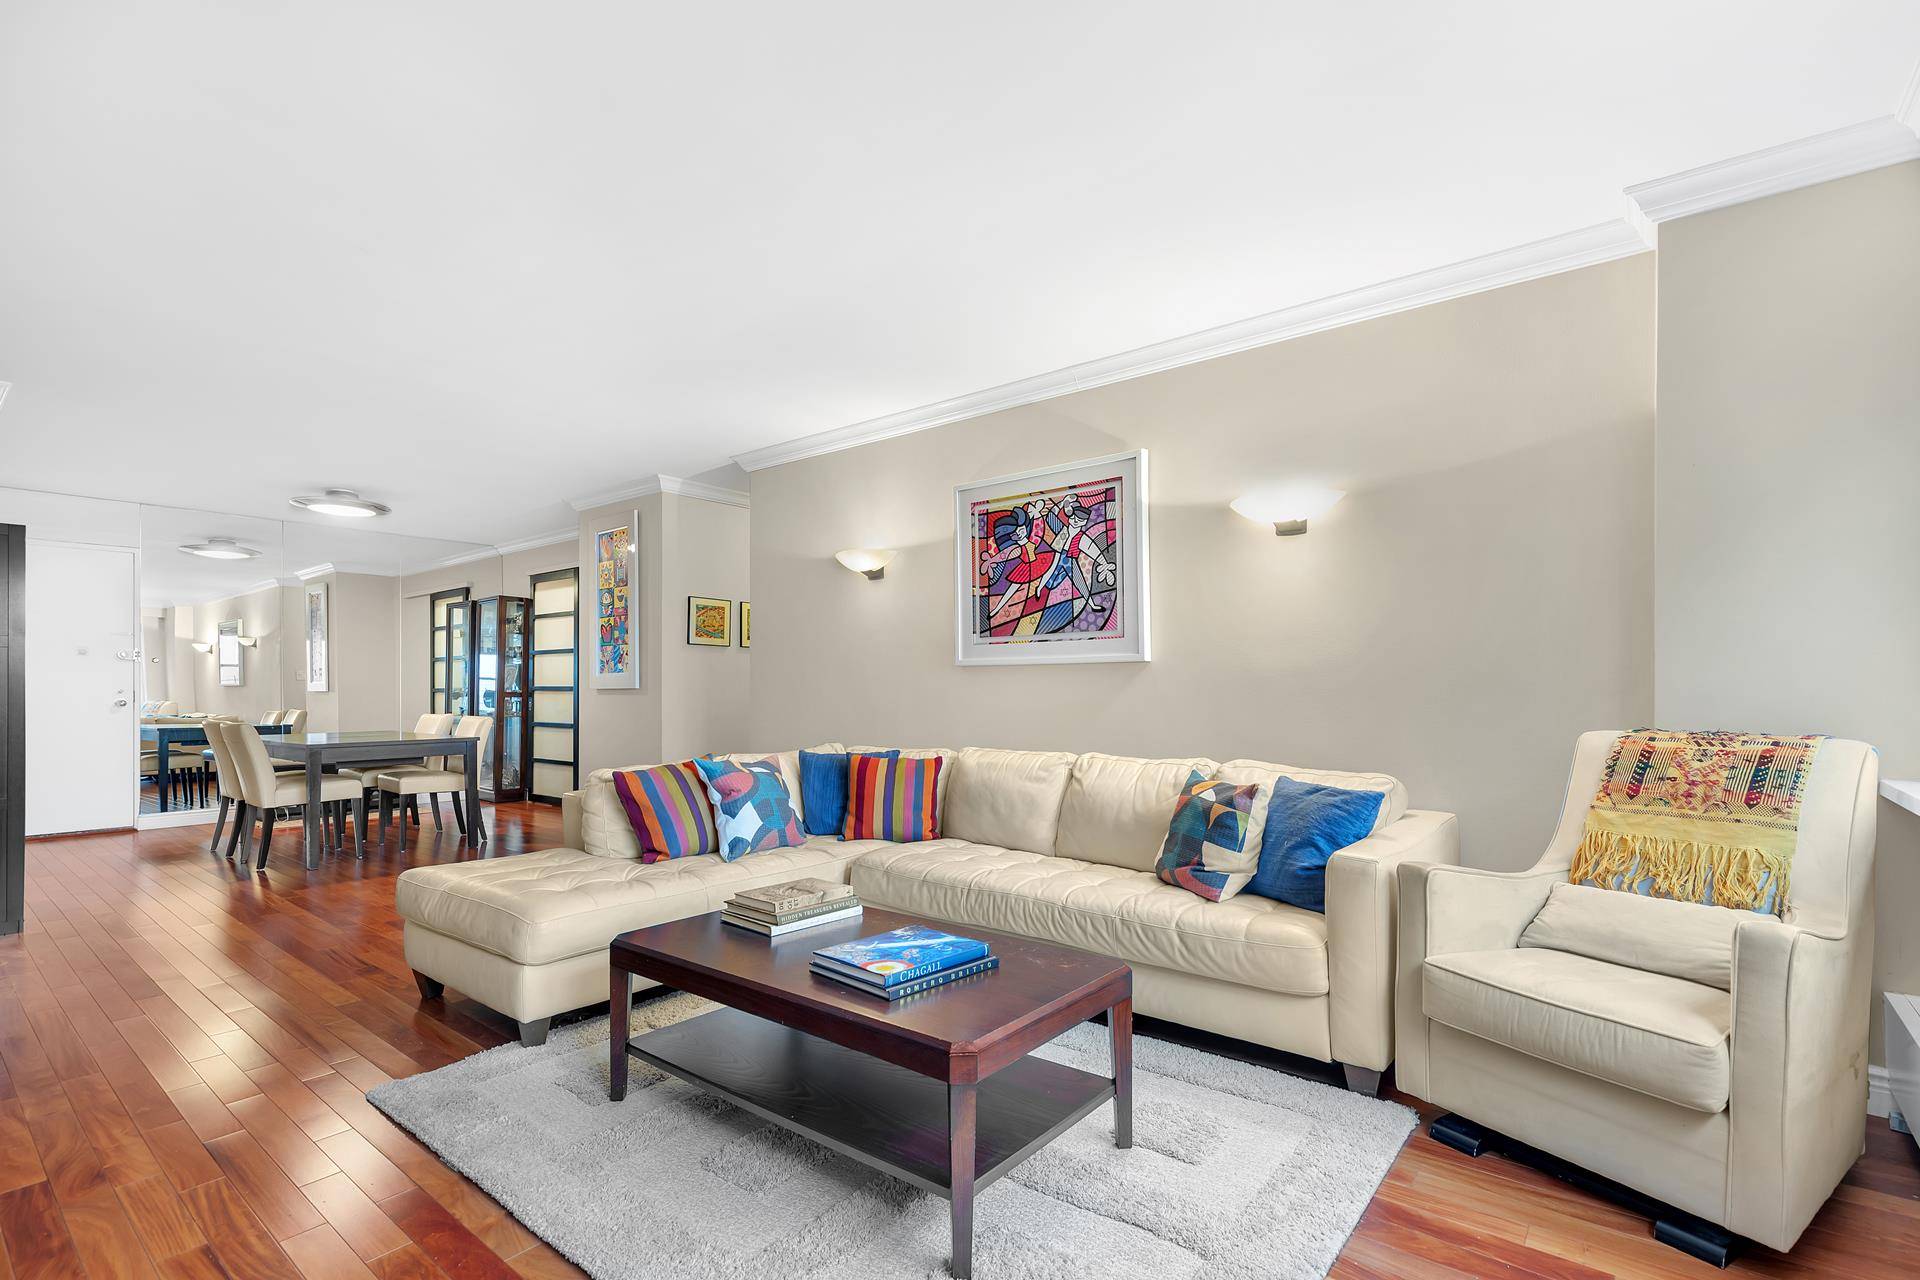 MOVE IN READY, 2BD 2BA WITH STUNNING VIEWS OVER THE EAST RIVER WITH LOW MAINTENANCE.